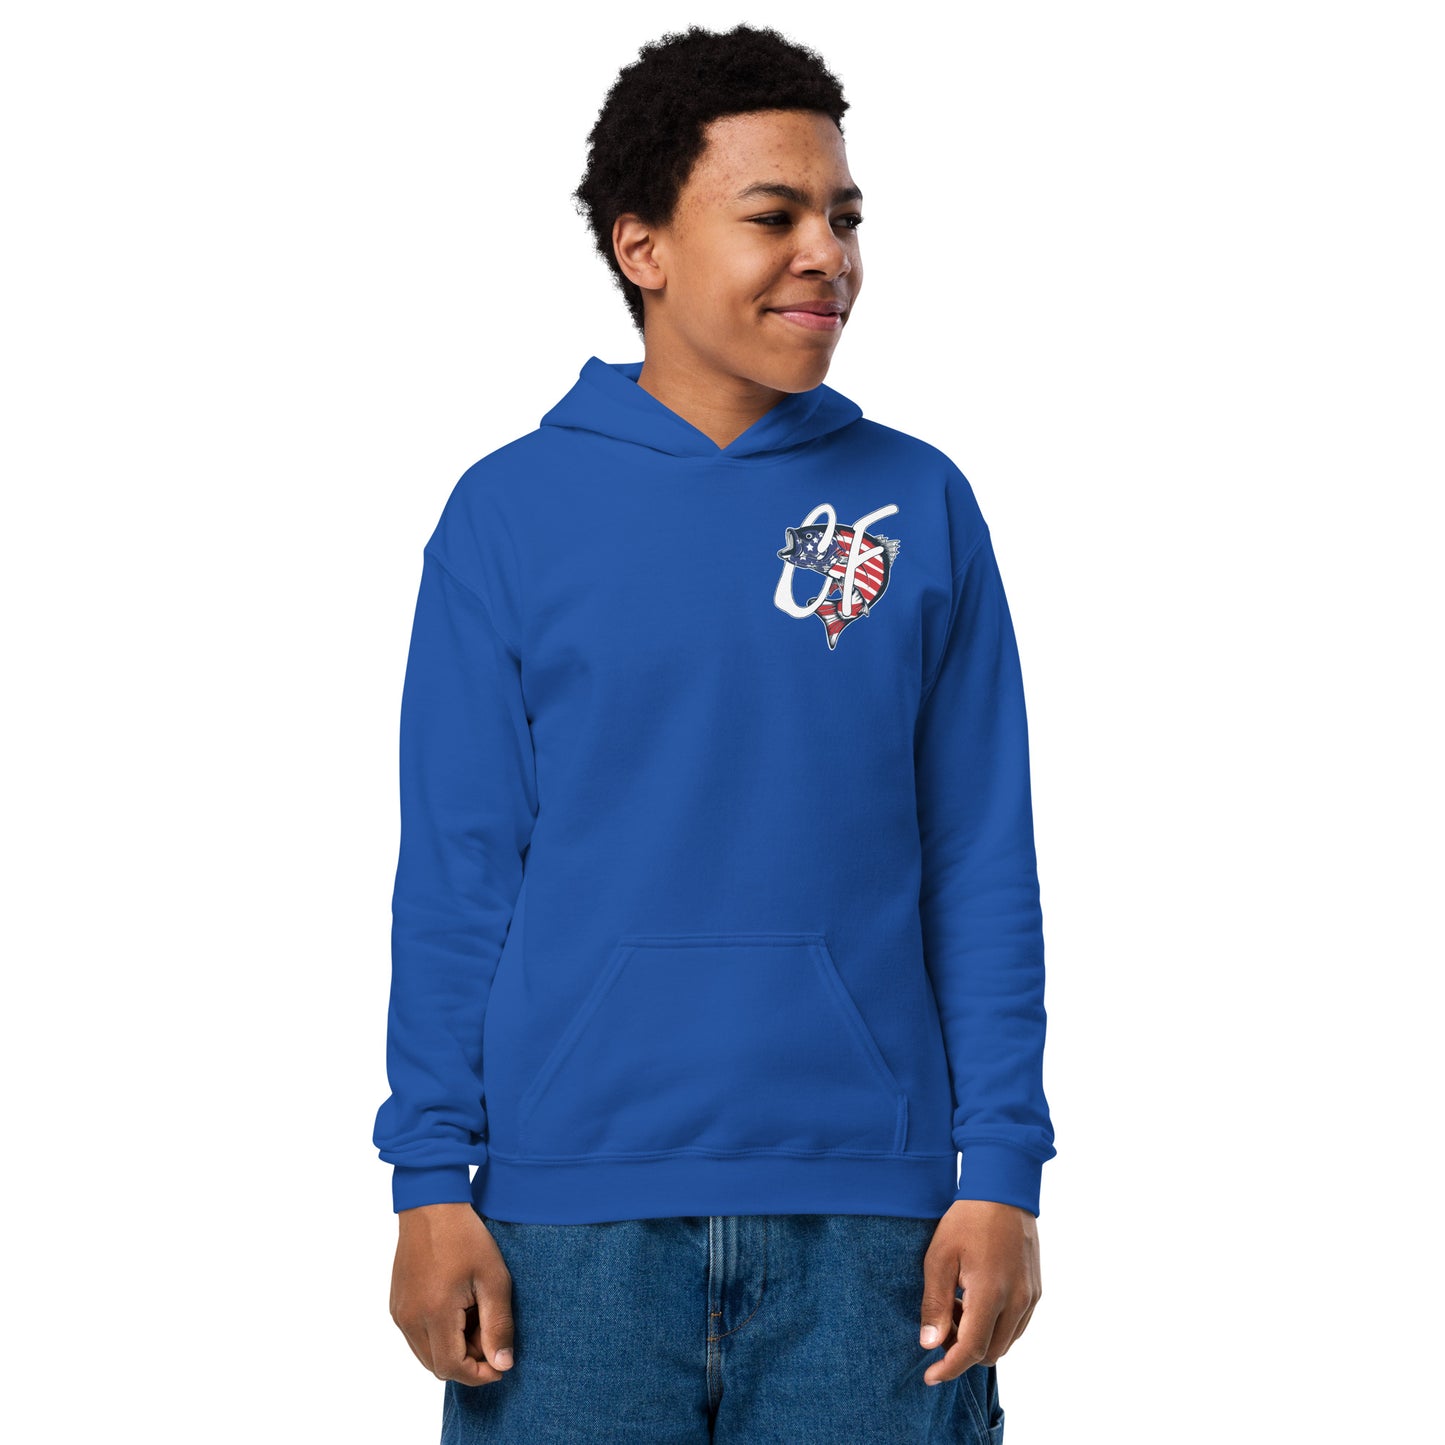 'United by Stripes' Youth Hooded Sweatshirt